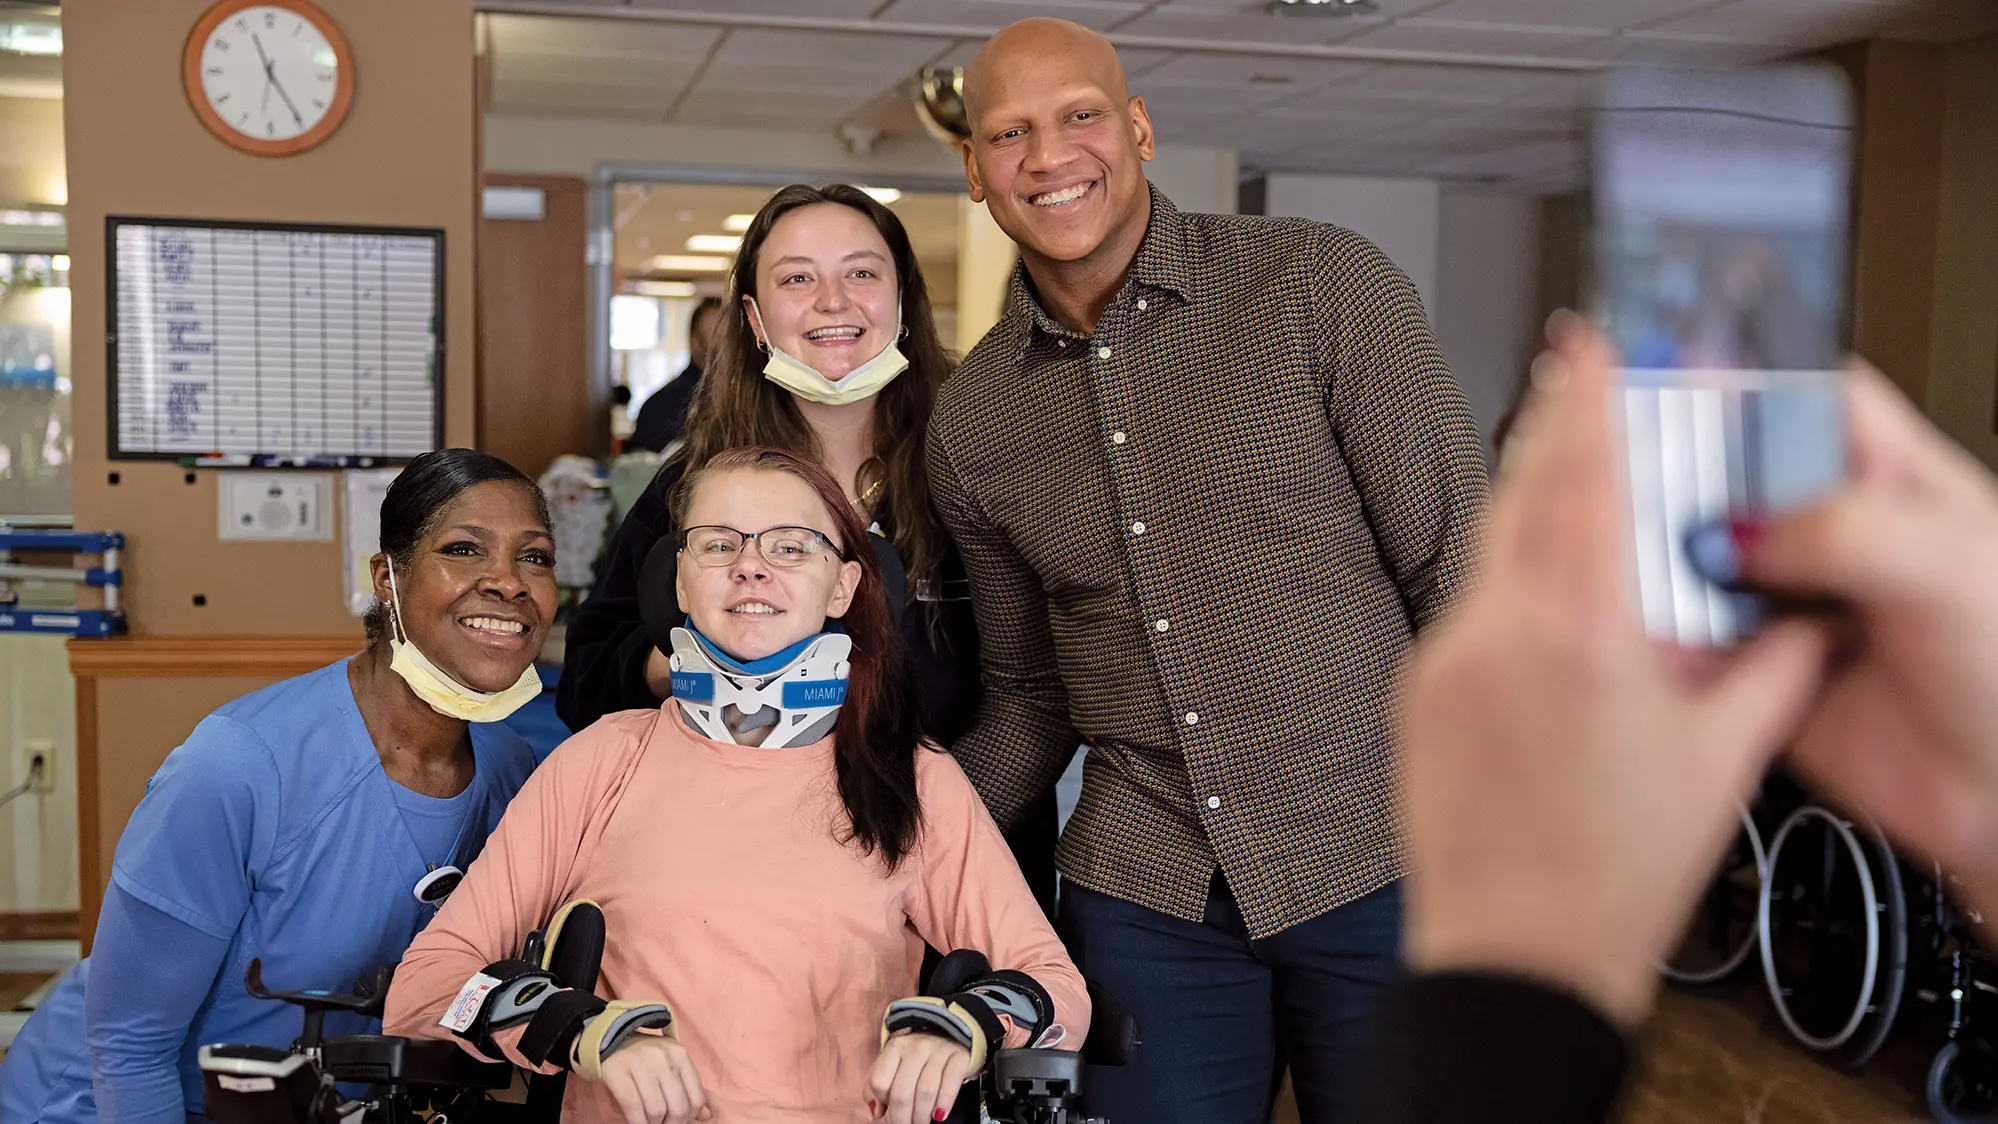 A young woman in a neck brace leans back in her wheelchair and looks at a person taking a cellphone photo, who’s barely shown at the edge of the photo. On the patient’s arms are braces, and her fingernails are painted. Around her are Ryan Shazier and two hospital workers also posing for the camera.